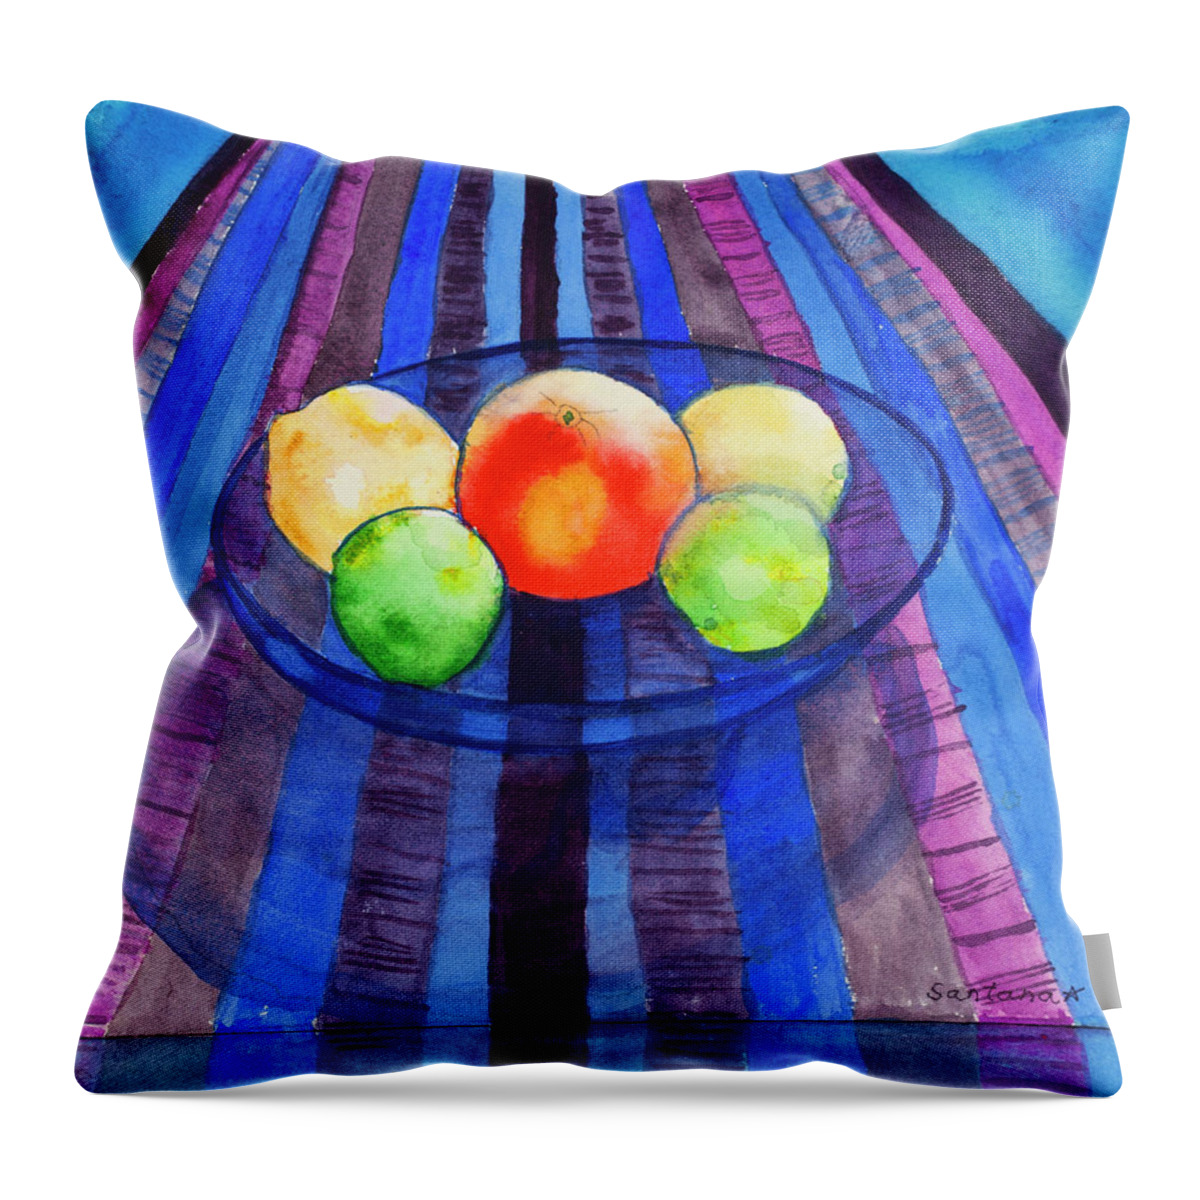 Still Life Throw Pillow featuring the painting Fruit Bowl on Weaving  8.5 x 11 by Santana Star